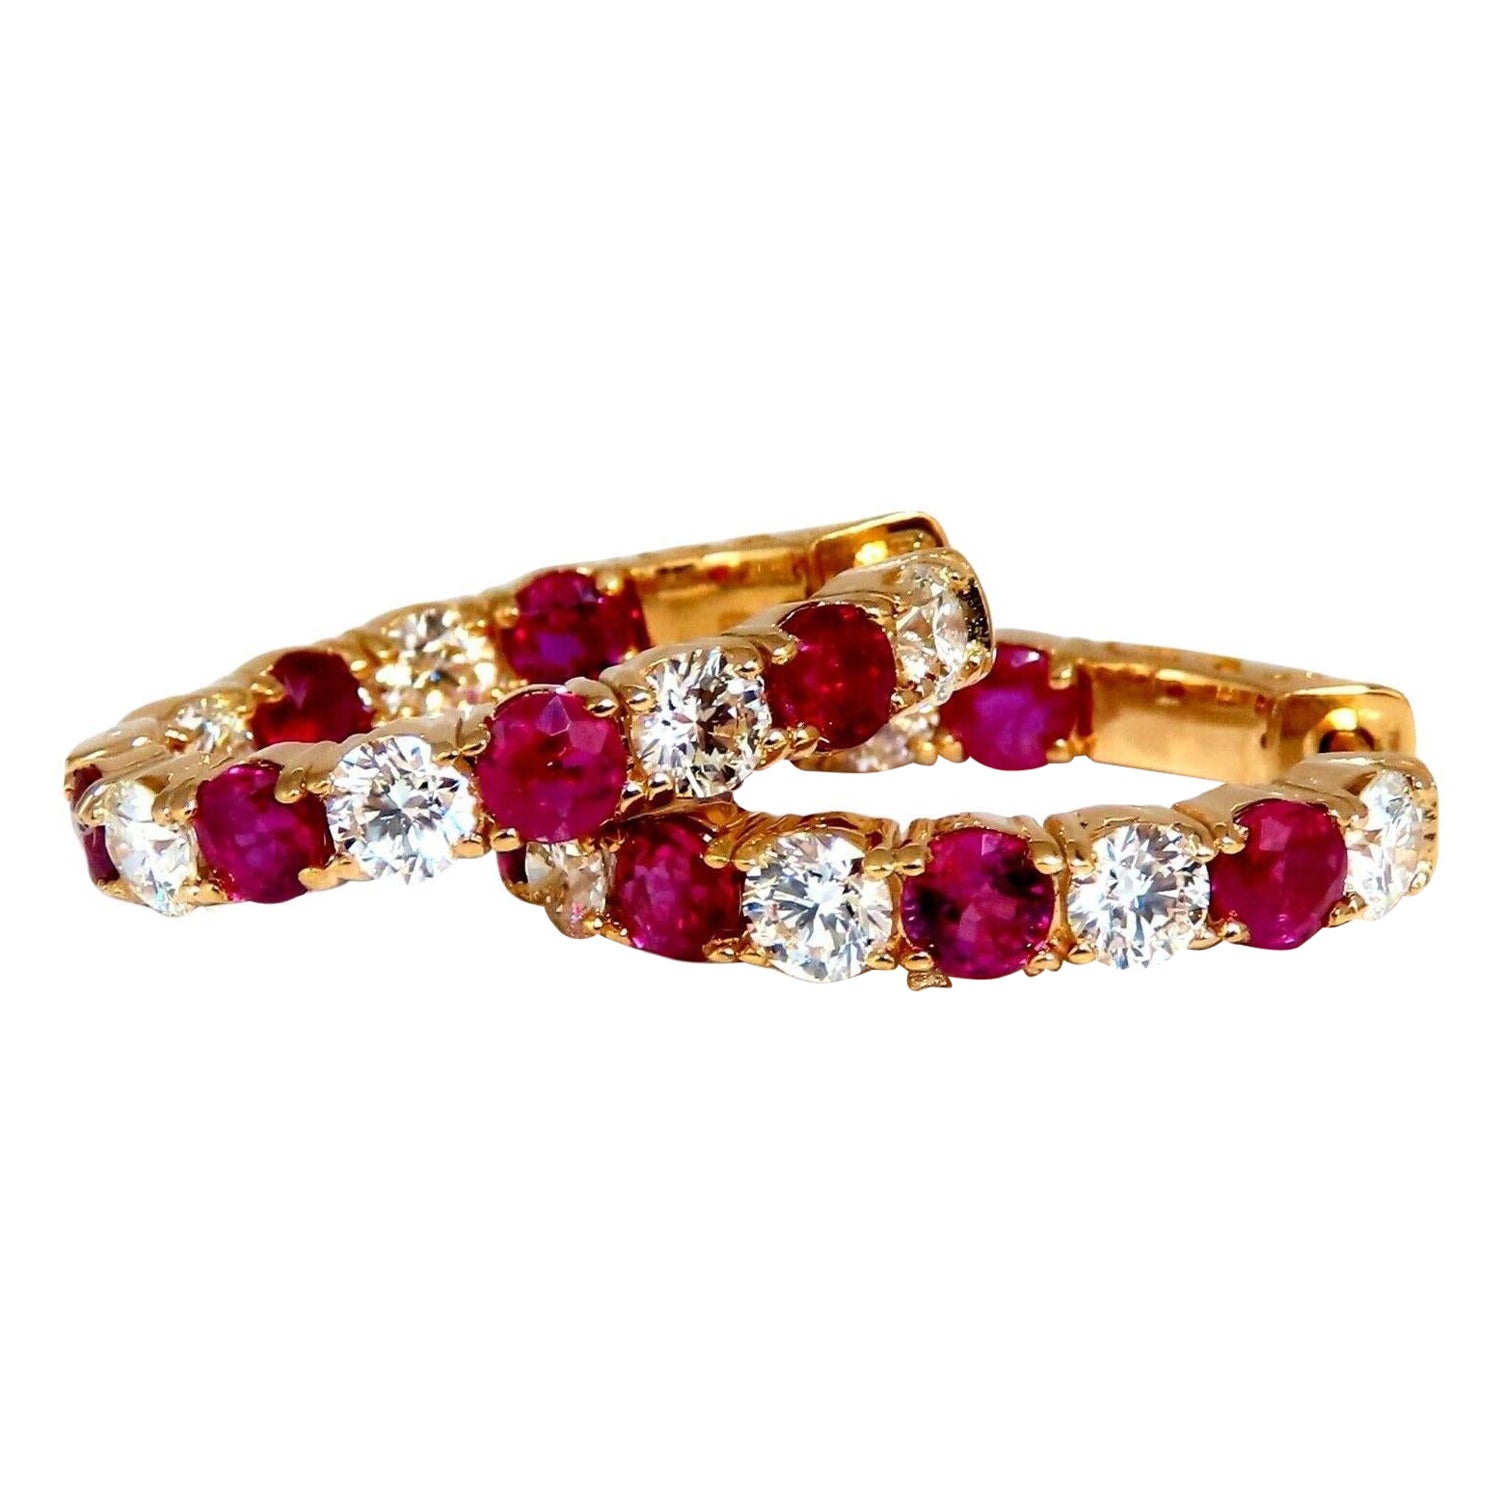 4.90ct Natural Ruby Diamonds Elongated Hoop Earrings 14kt Yellow Gold Inside Out For Sale